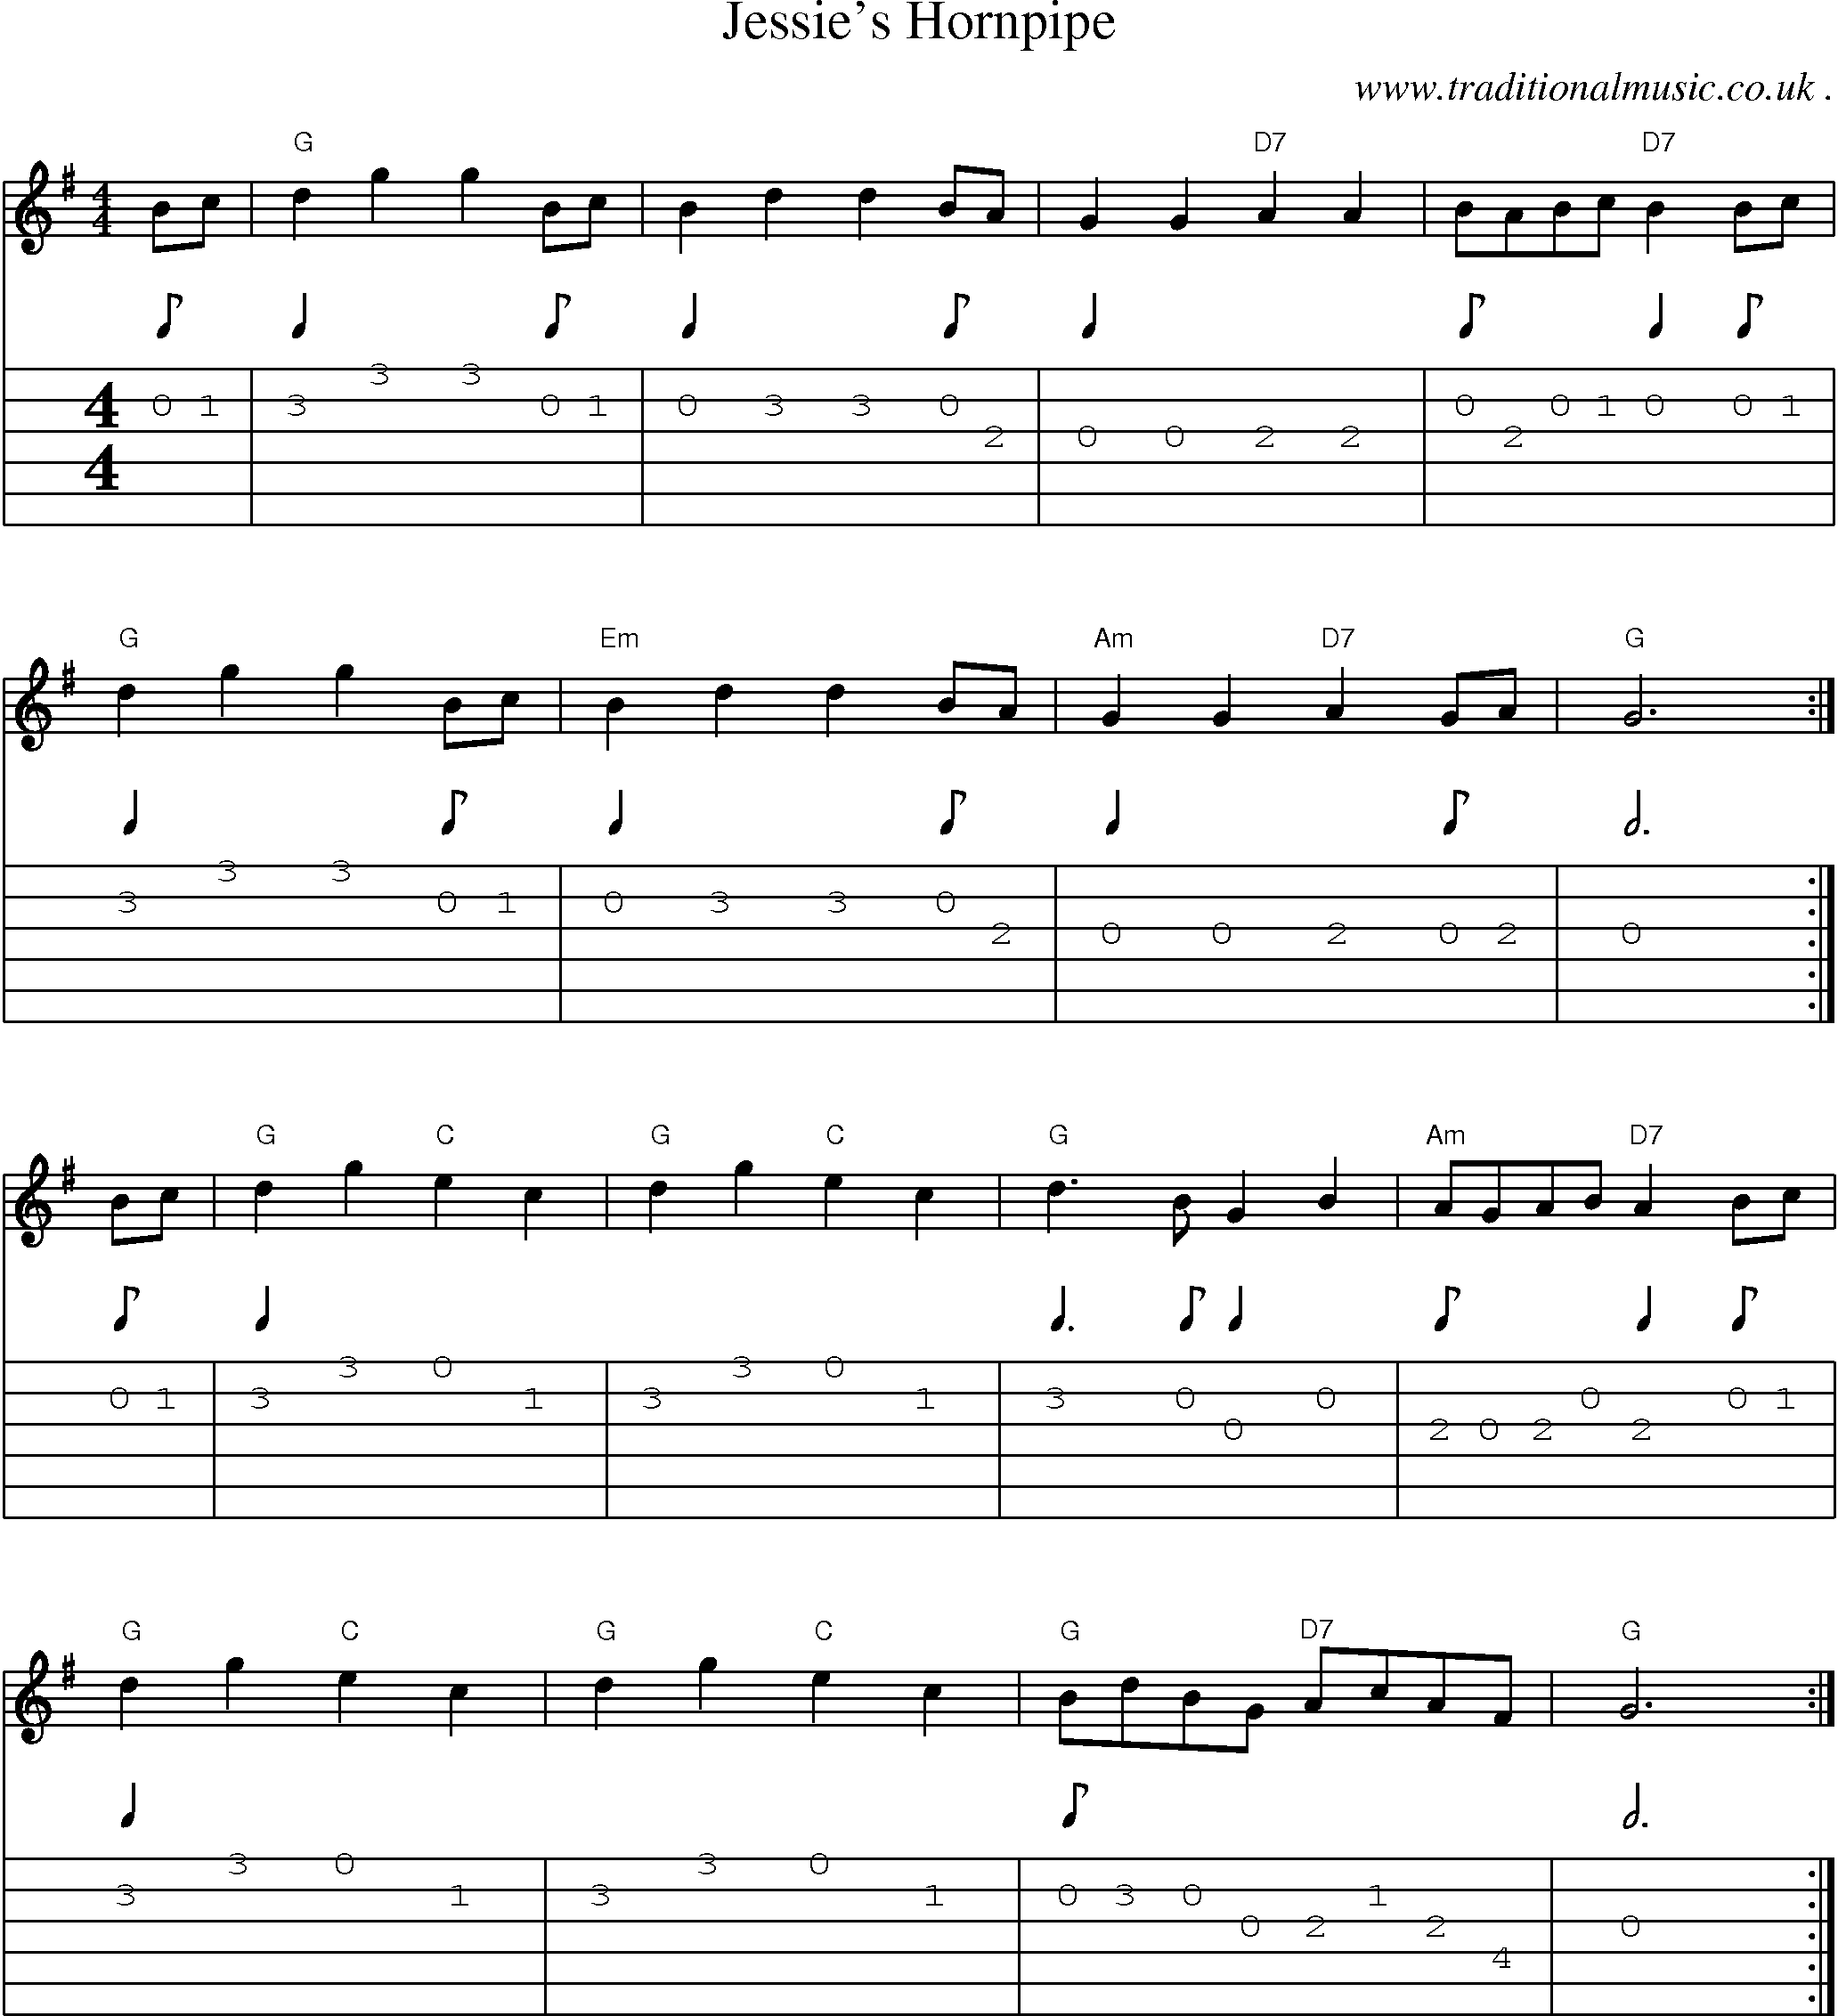 Music Score and Guitar Tabs for Jessies Hornpipe